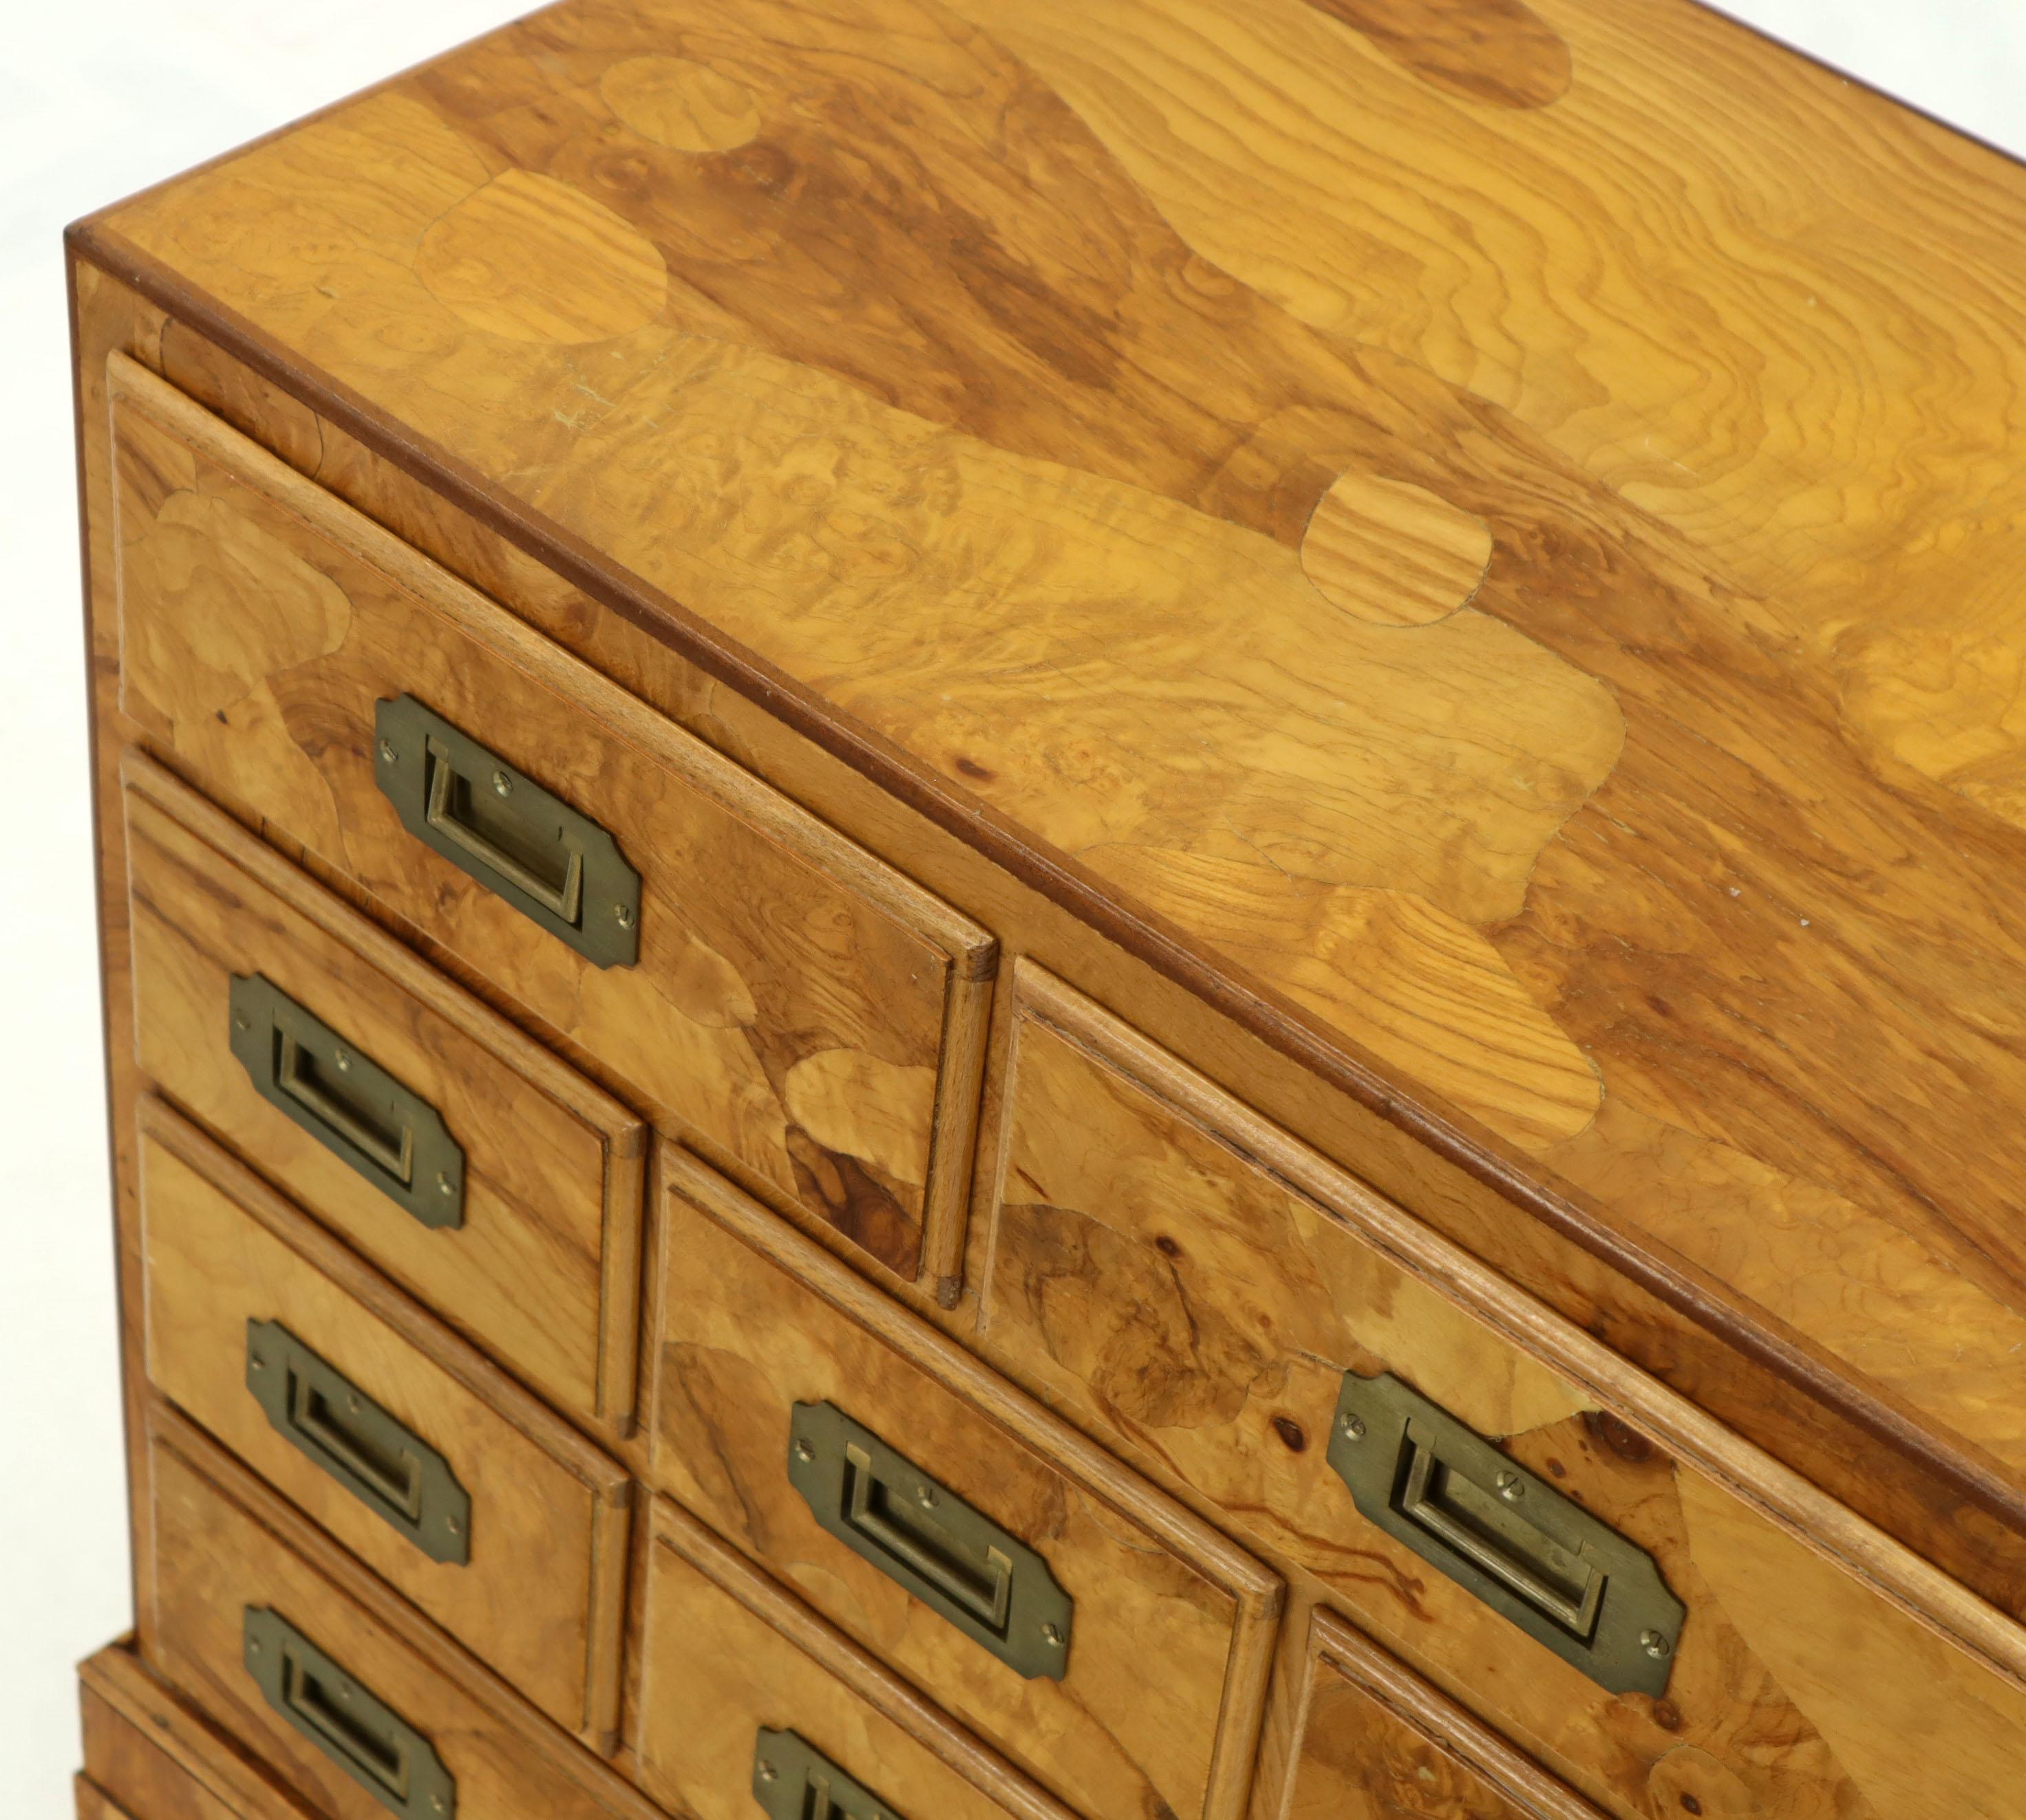 Italian bracket feet 9 drawers vivid olive burl wood pattern bachelor chest of drawers small dresser cabinet. Beautiful finished back exposing a 